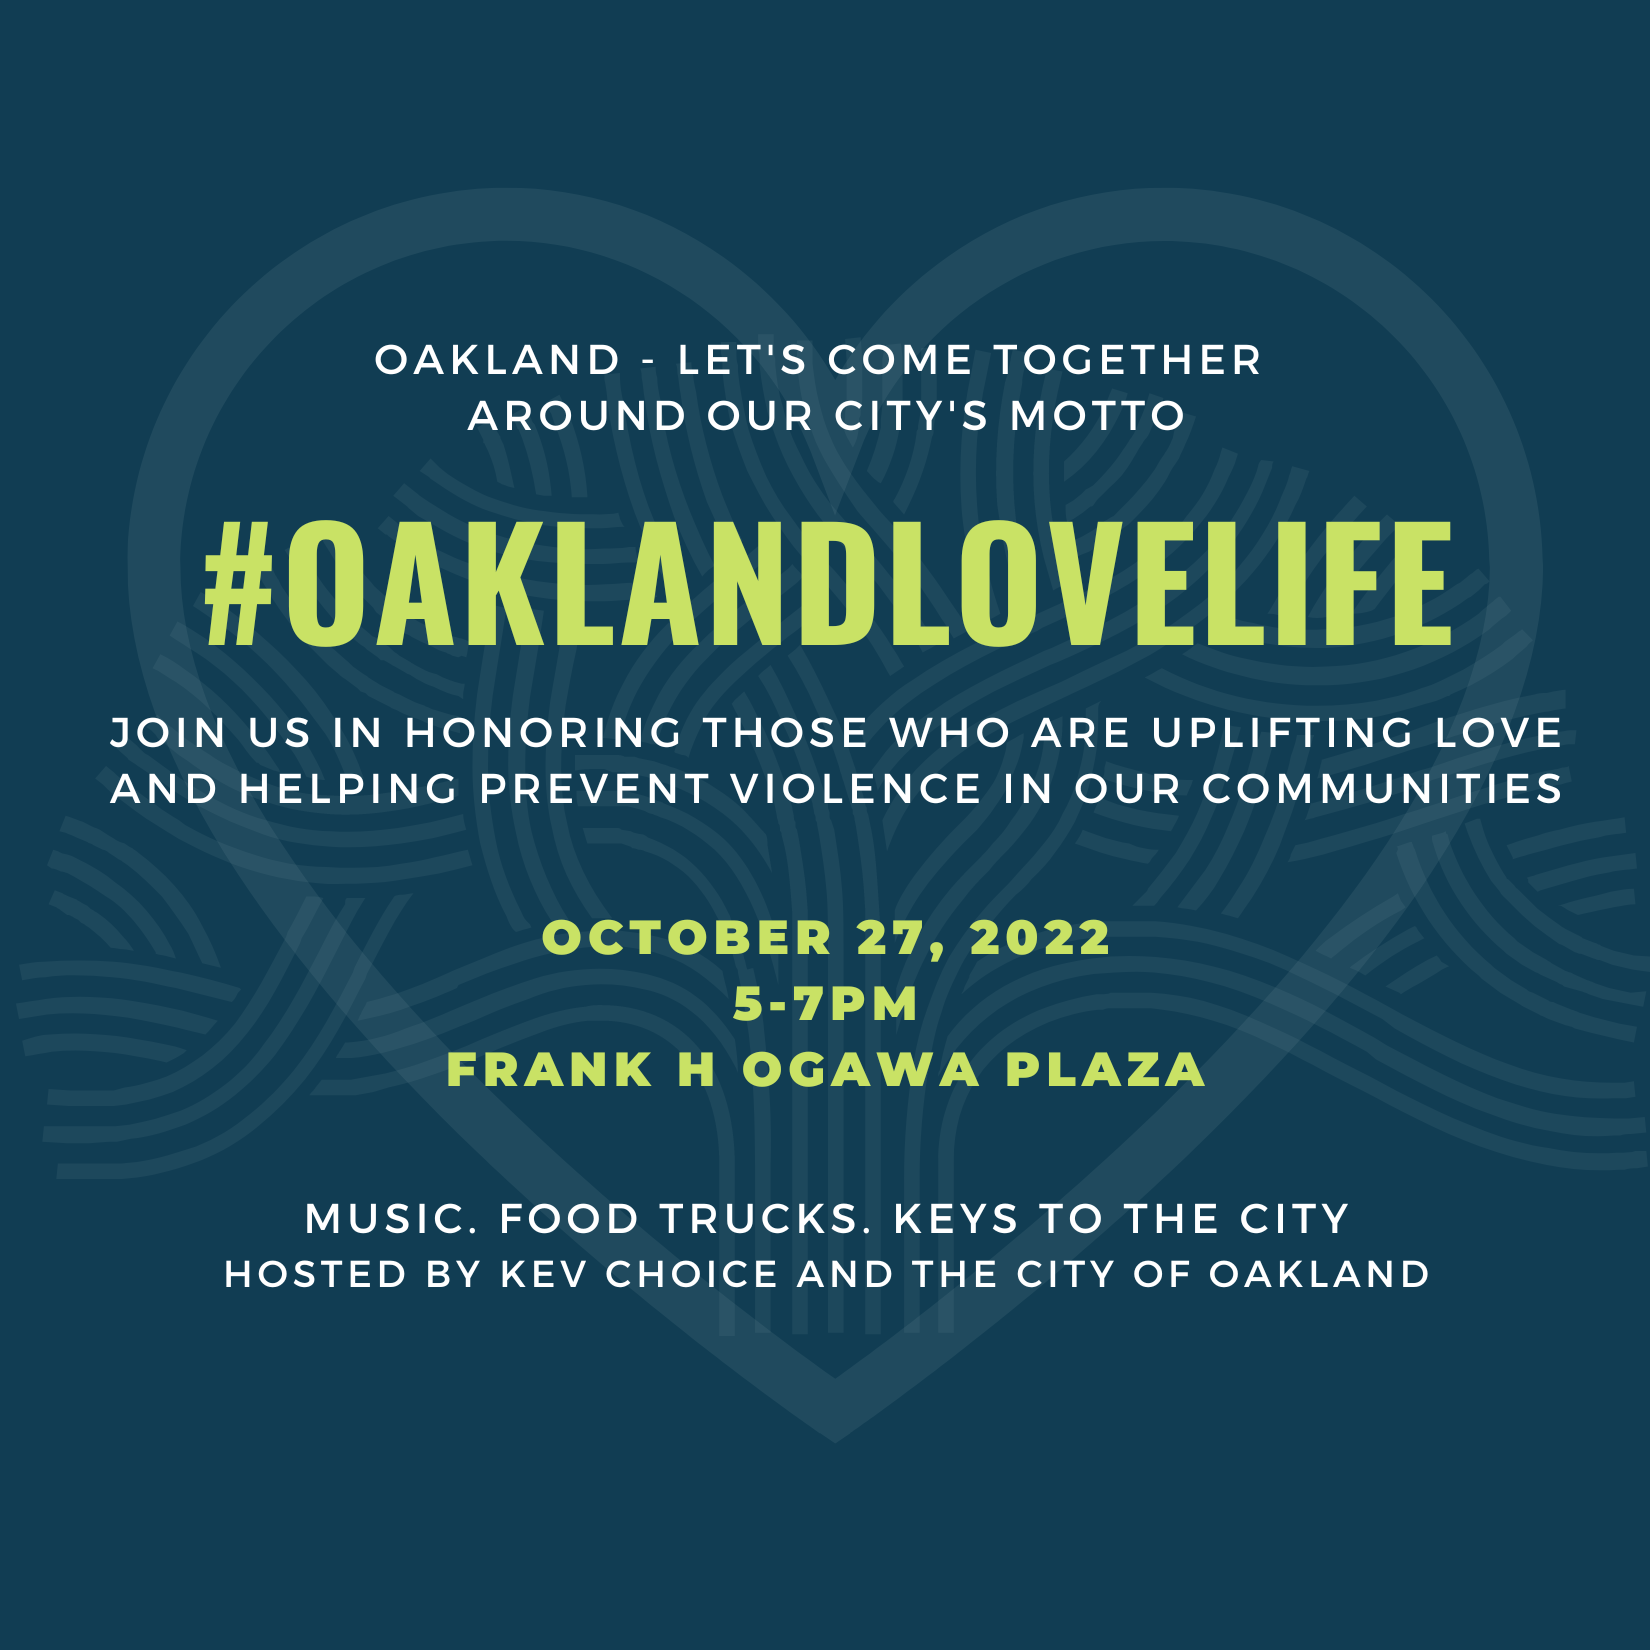 Oakland Love Life Event Flyer for 10.27.22